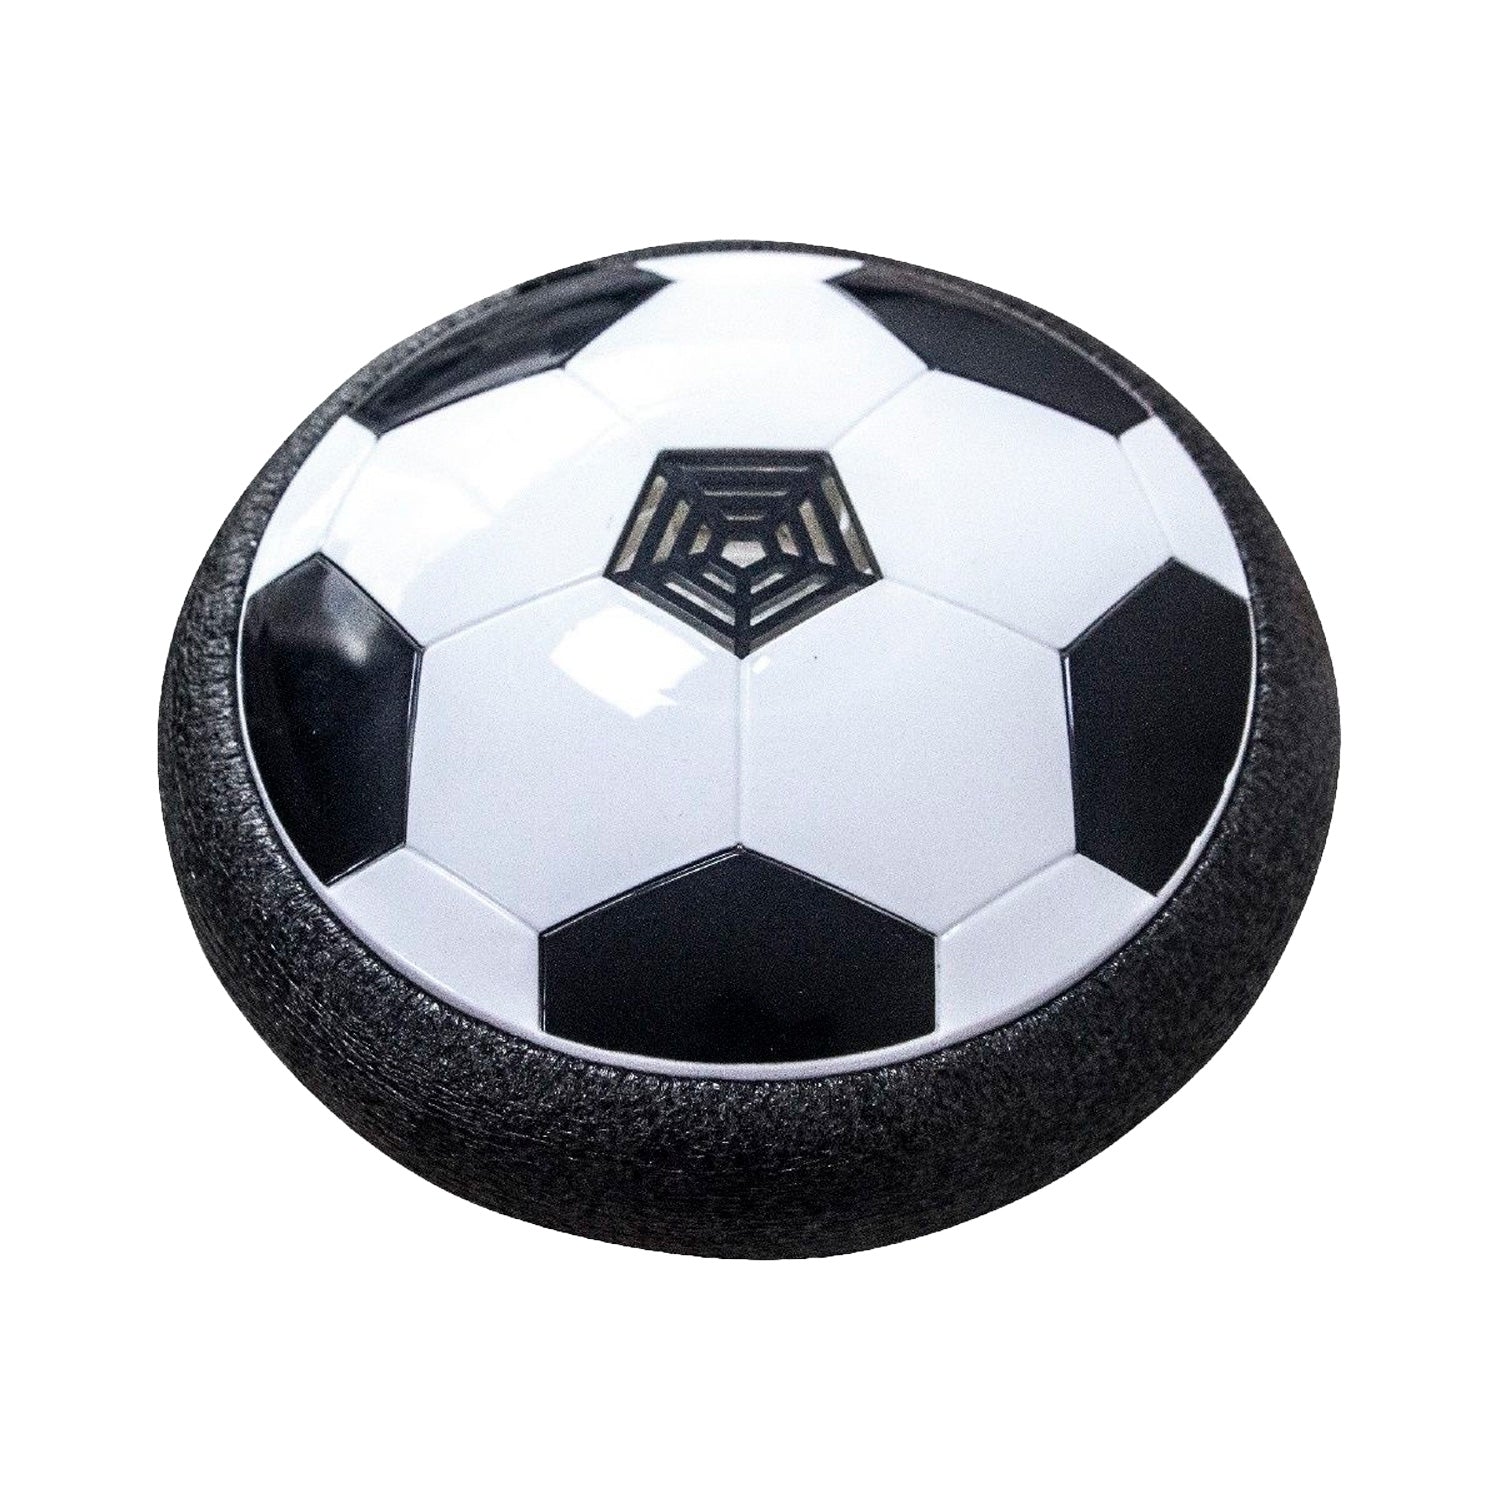 Hover Ball - Bola Flutuante - Zoop Toys